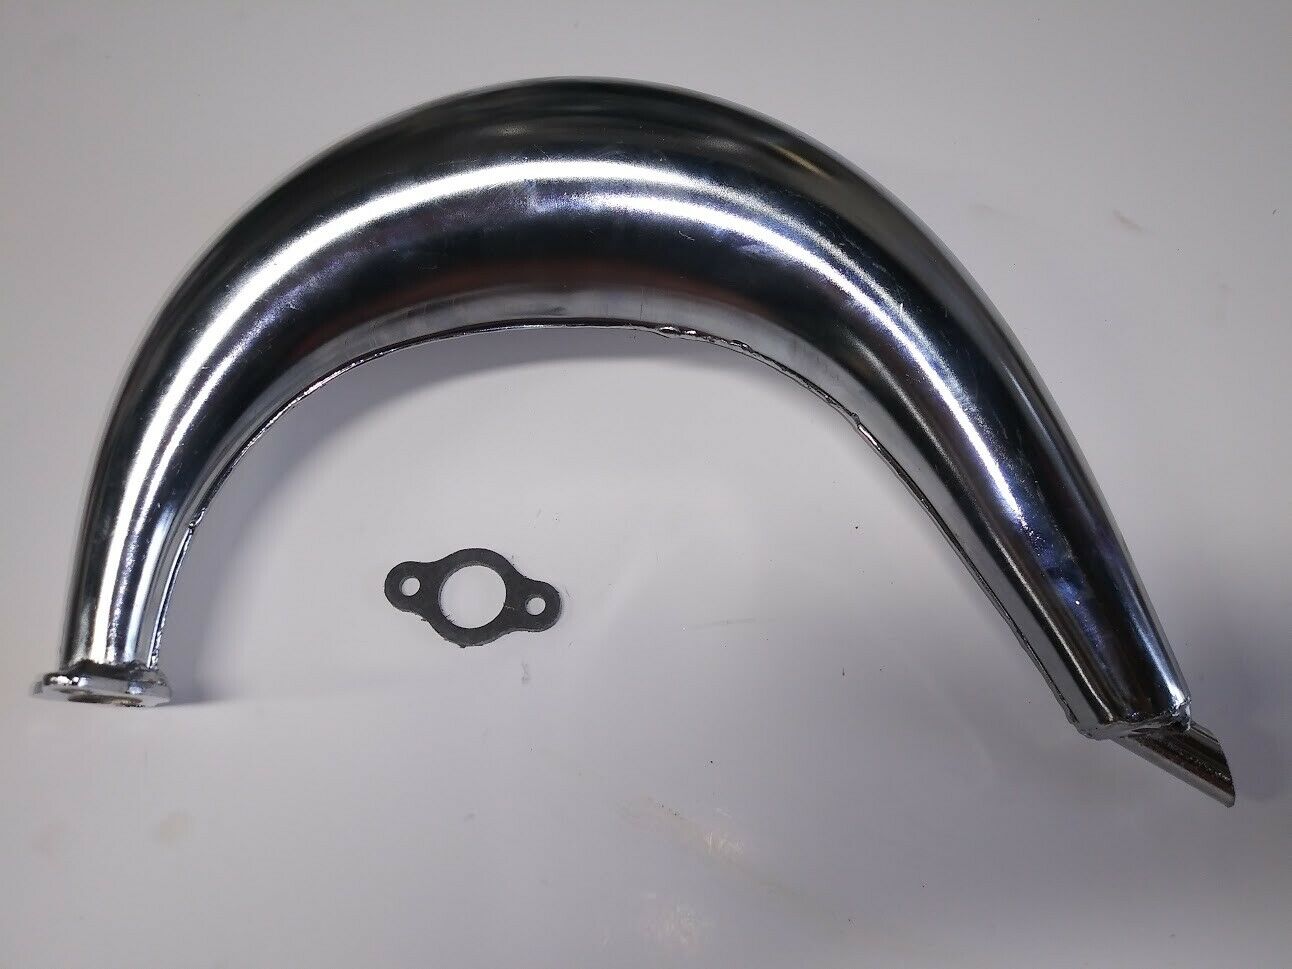 80CC 100cc Super Banana Expansion Chamber Exhaust with Gasket